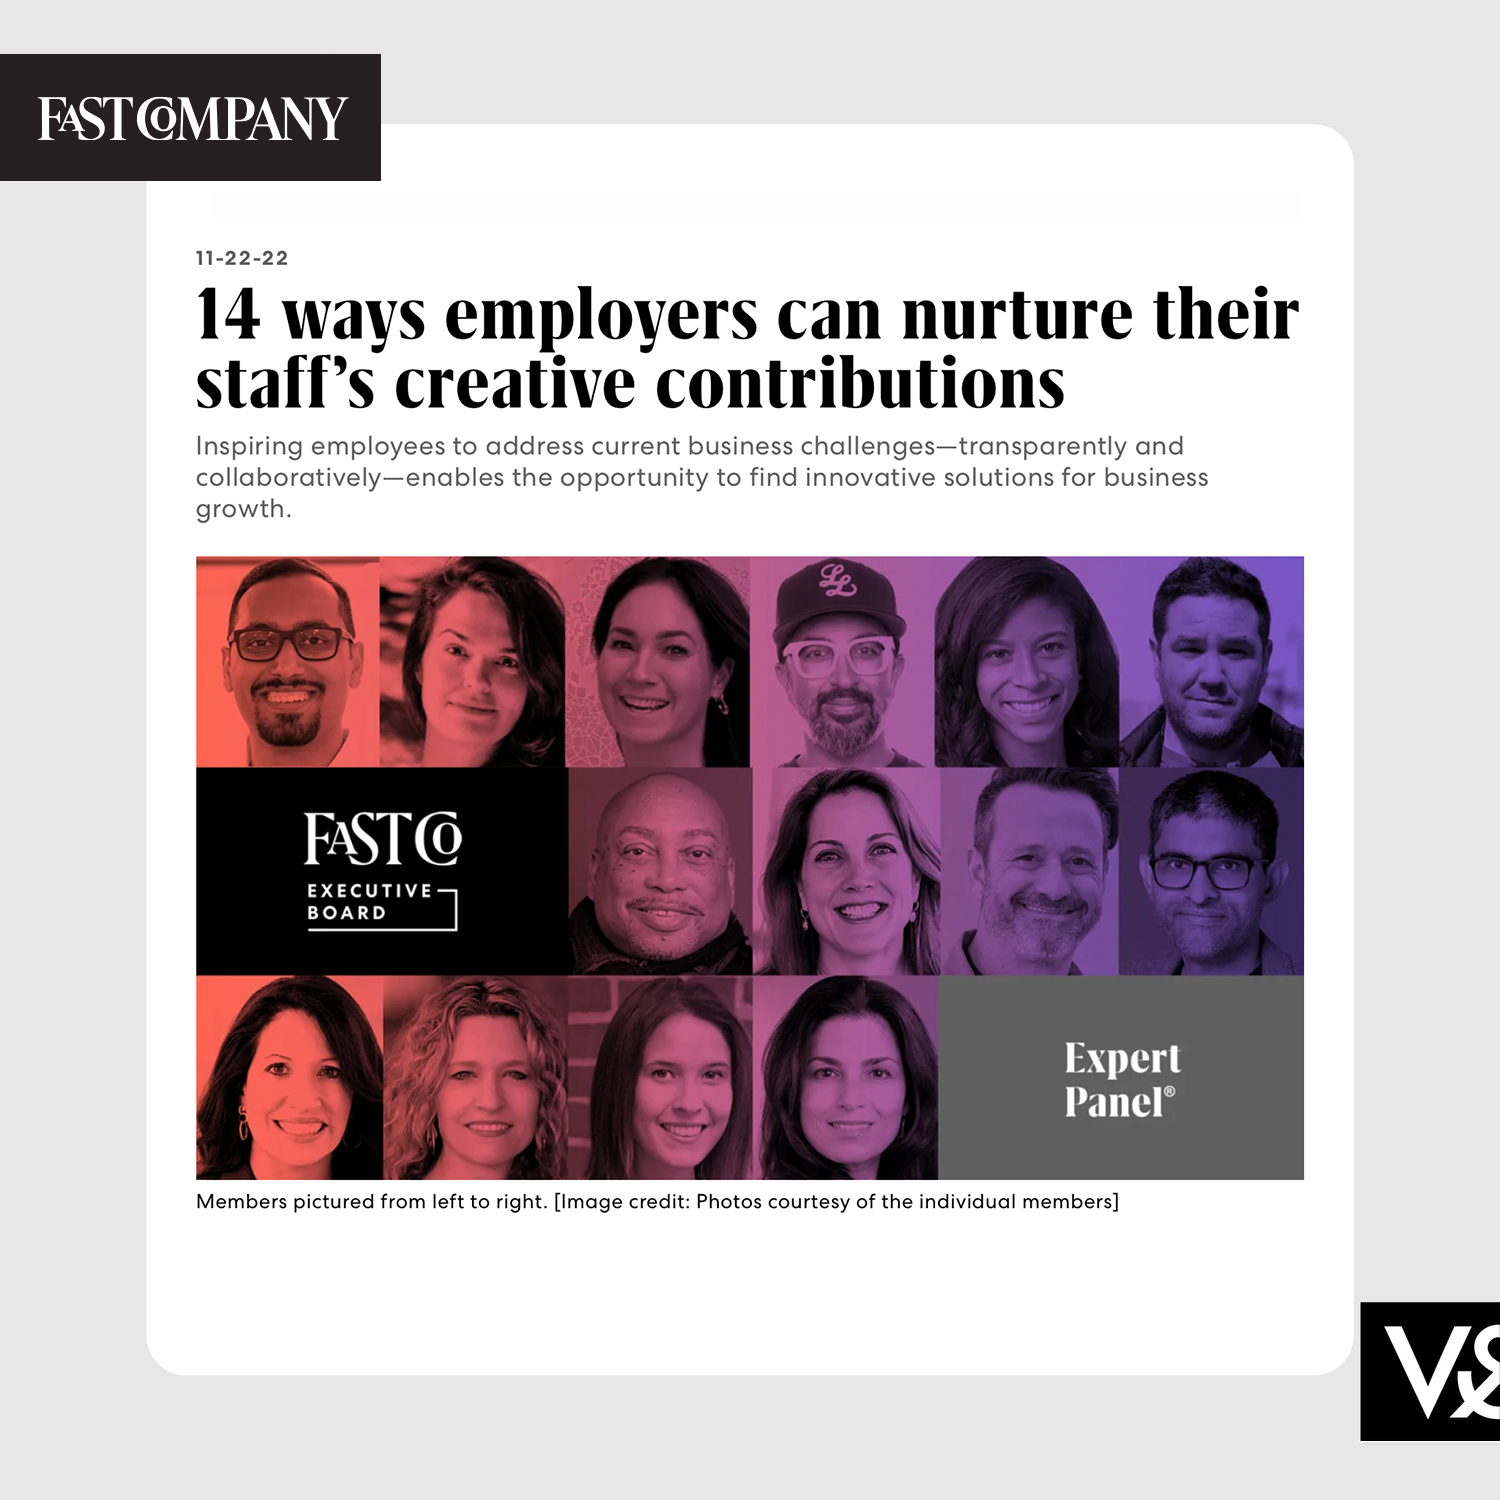 Fast Company – 14 Ways Employers Can Nurture Their Staff’s Creative Contributions